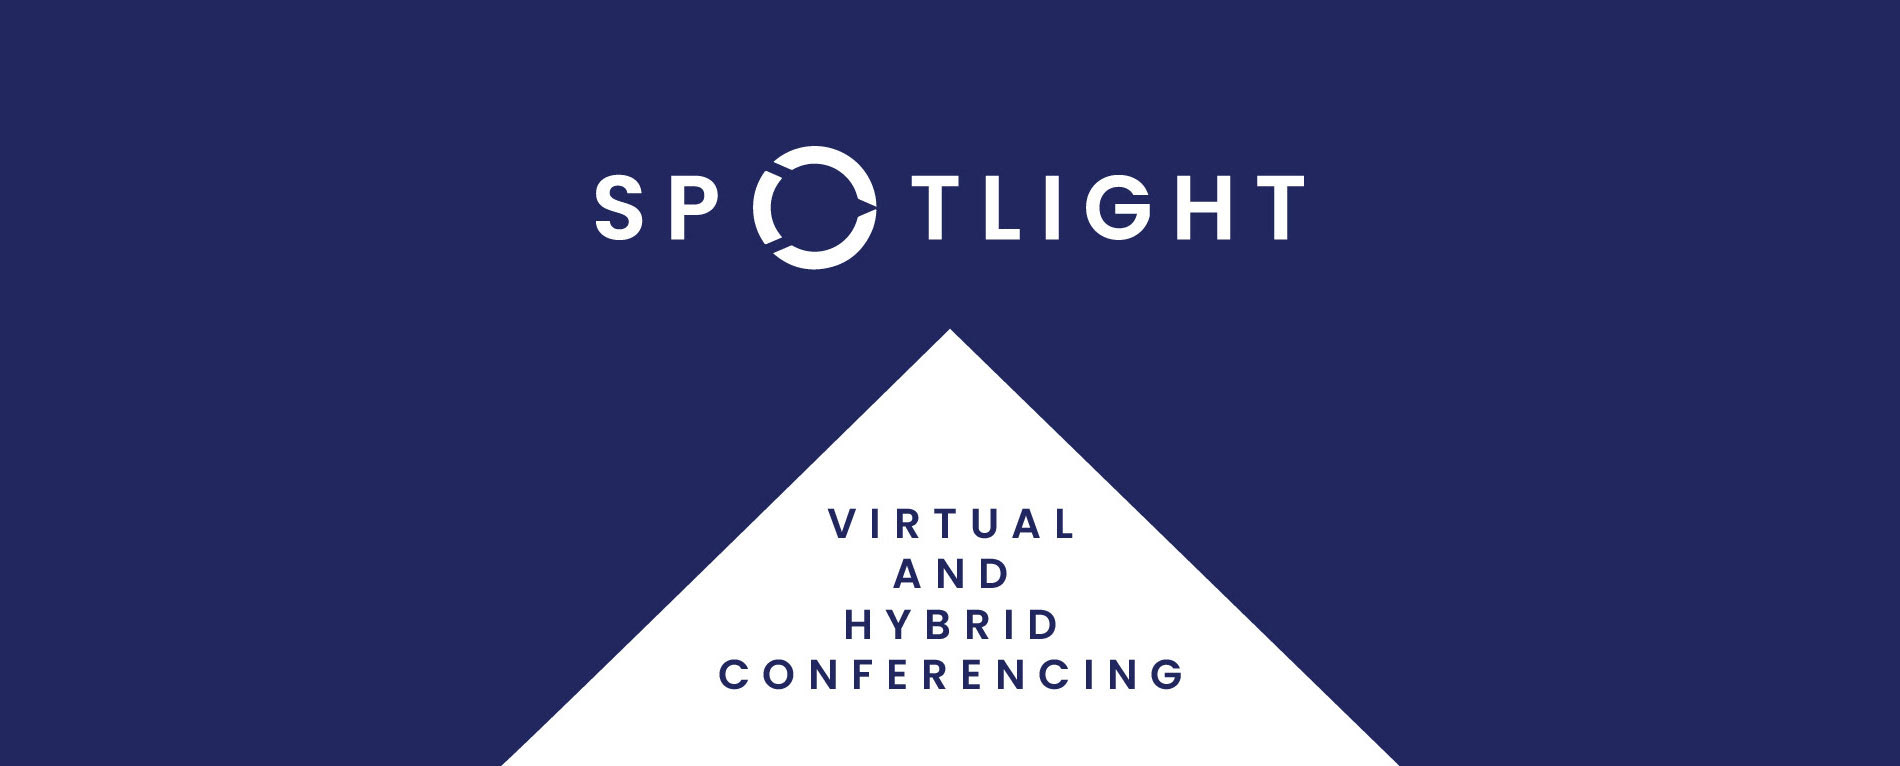 Spotlight on Virtual and Hybrid Conferencing - Directions Conference & Incentive Management